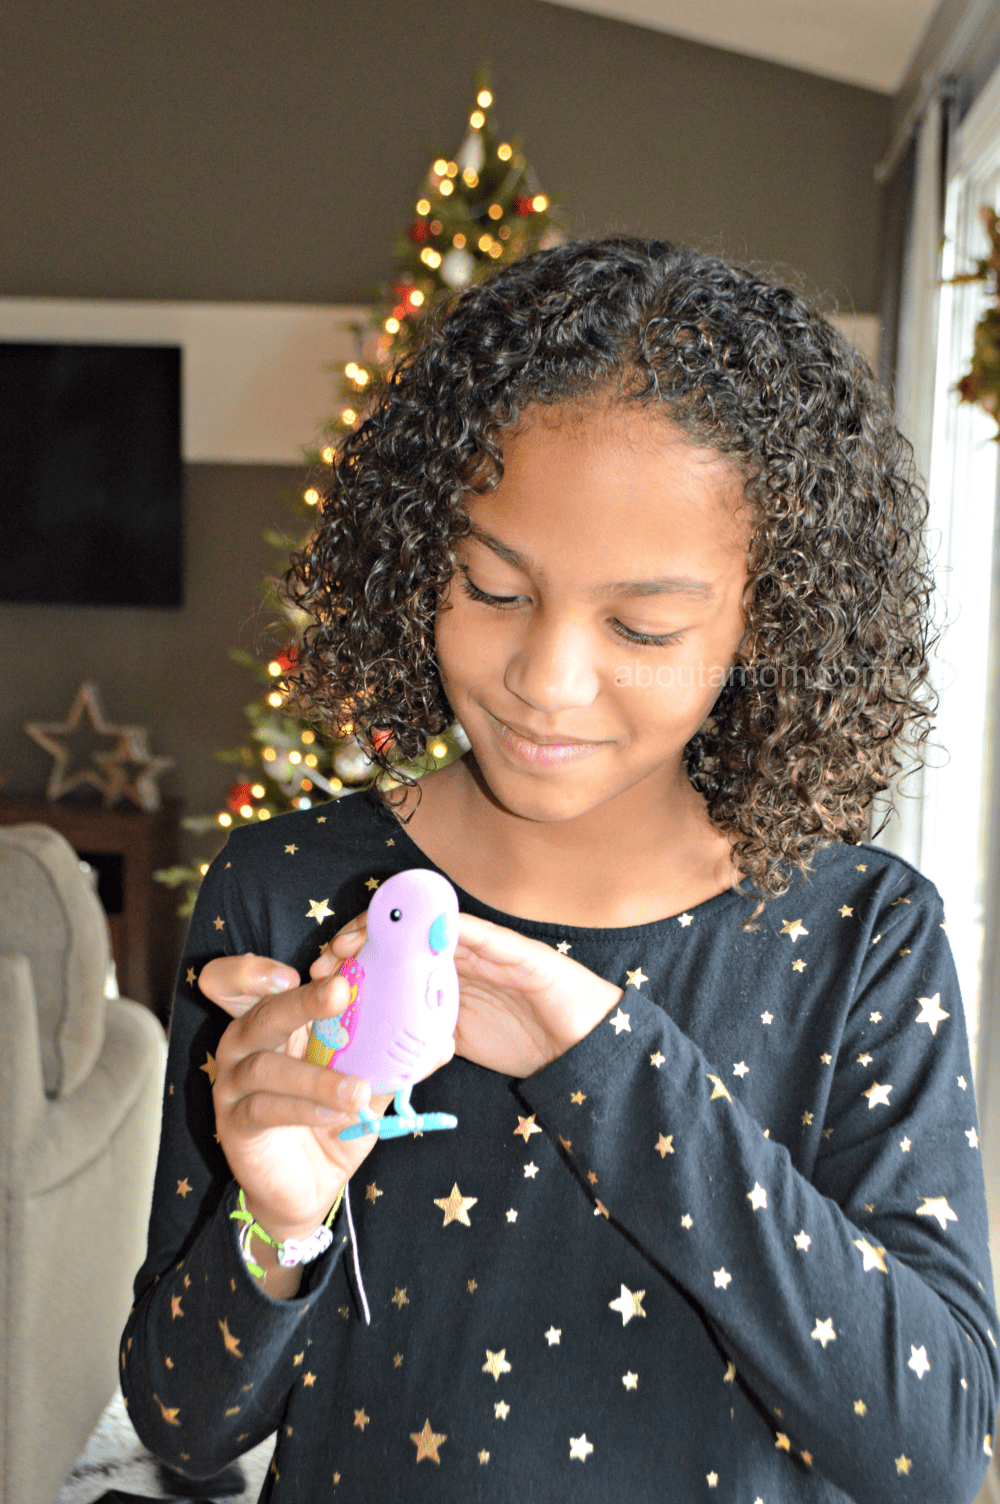 Check out the must-have interactive toys for girls available at Walmart this holiday season. Most require batteries, so be sure to stock up on plenty Energizer batteries while you're shopping.